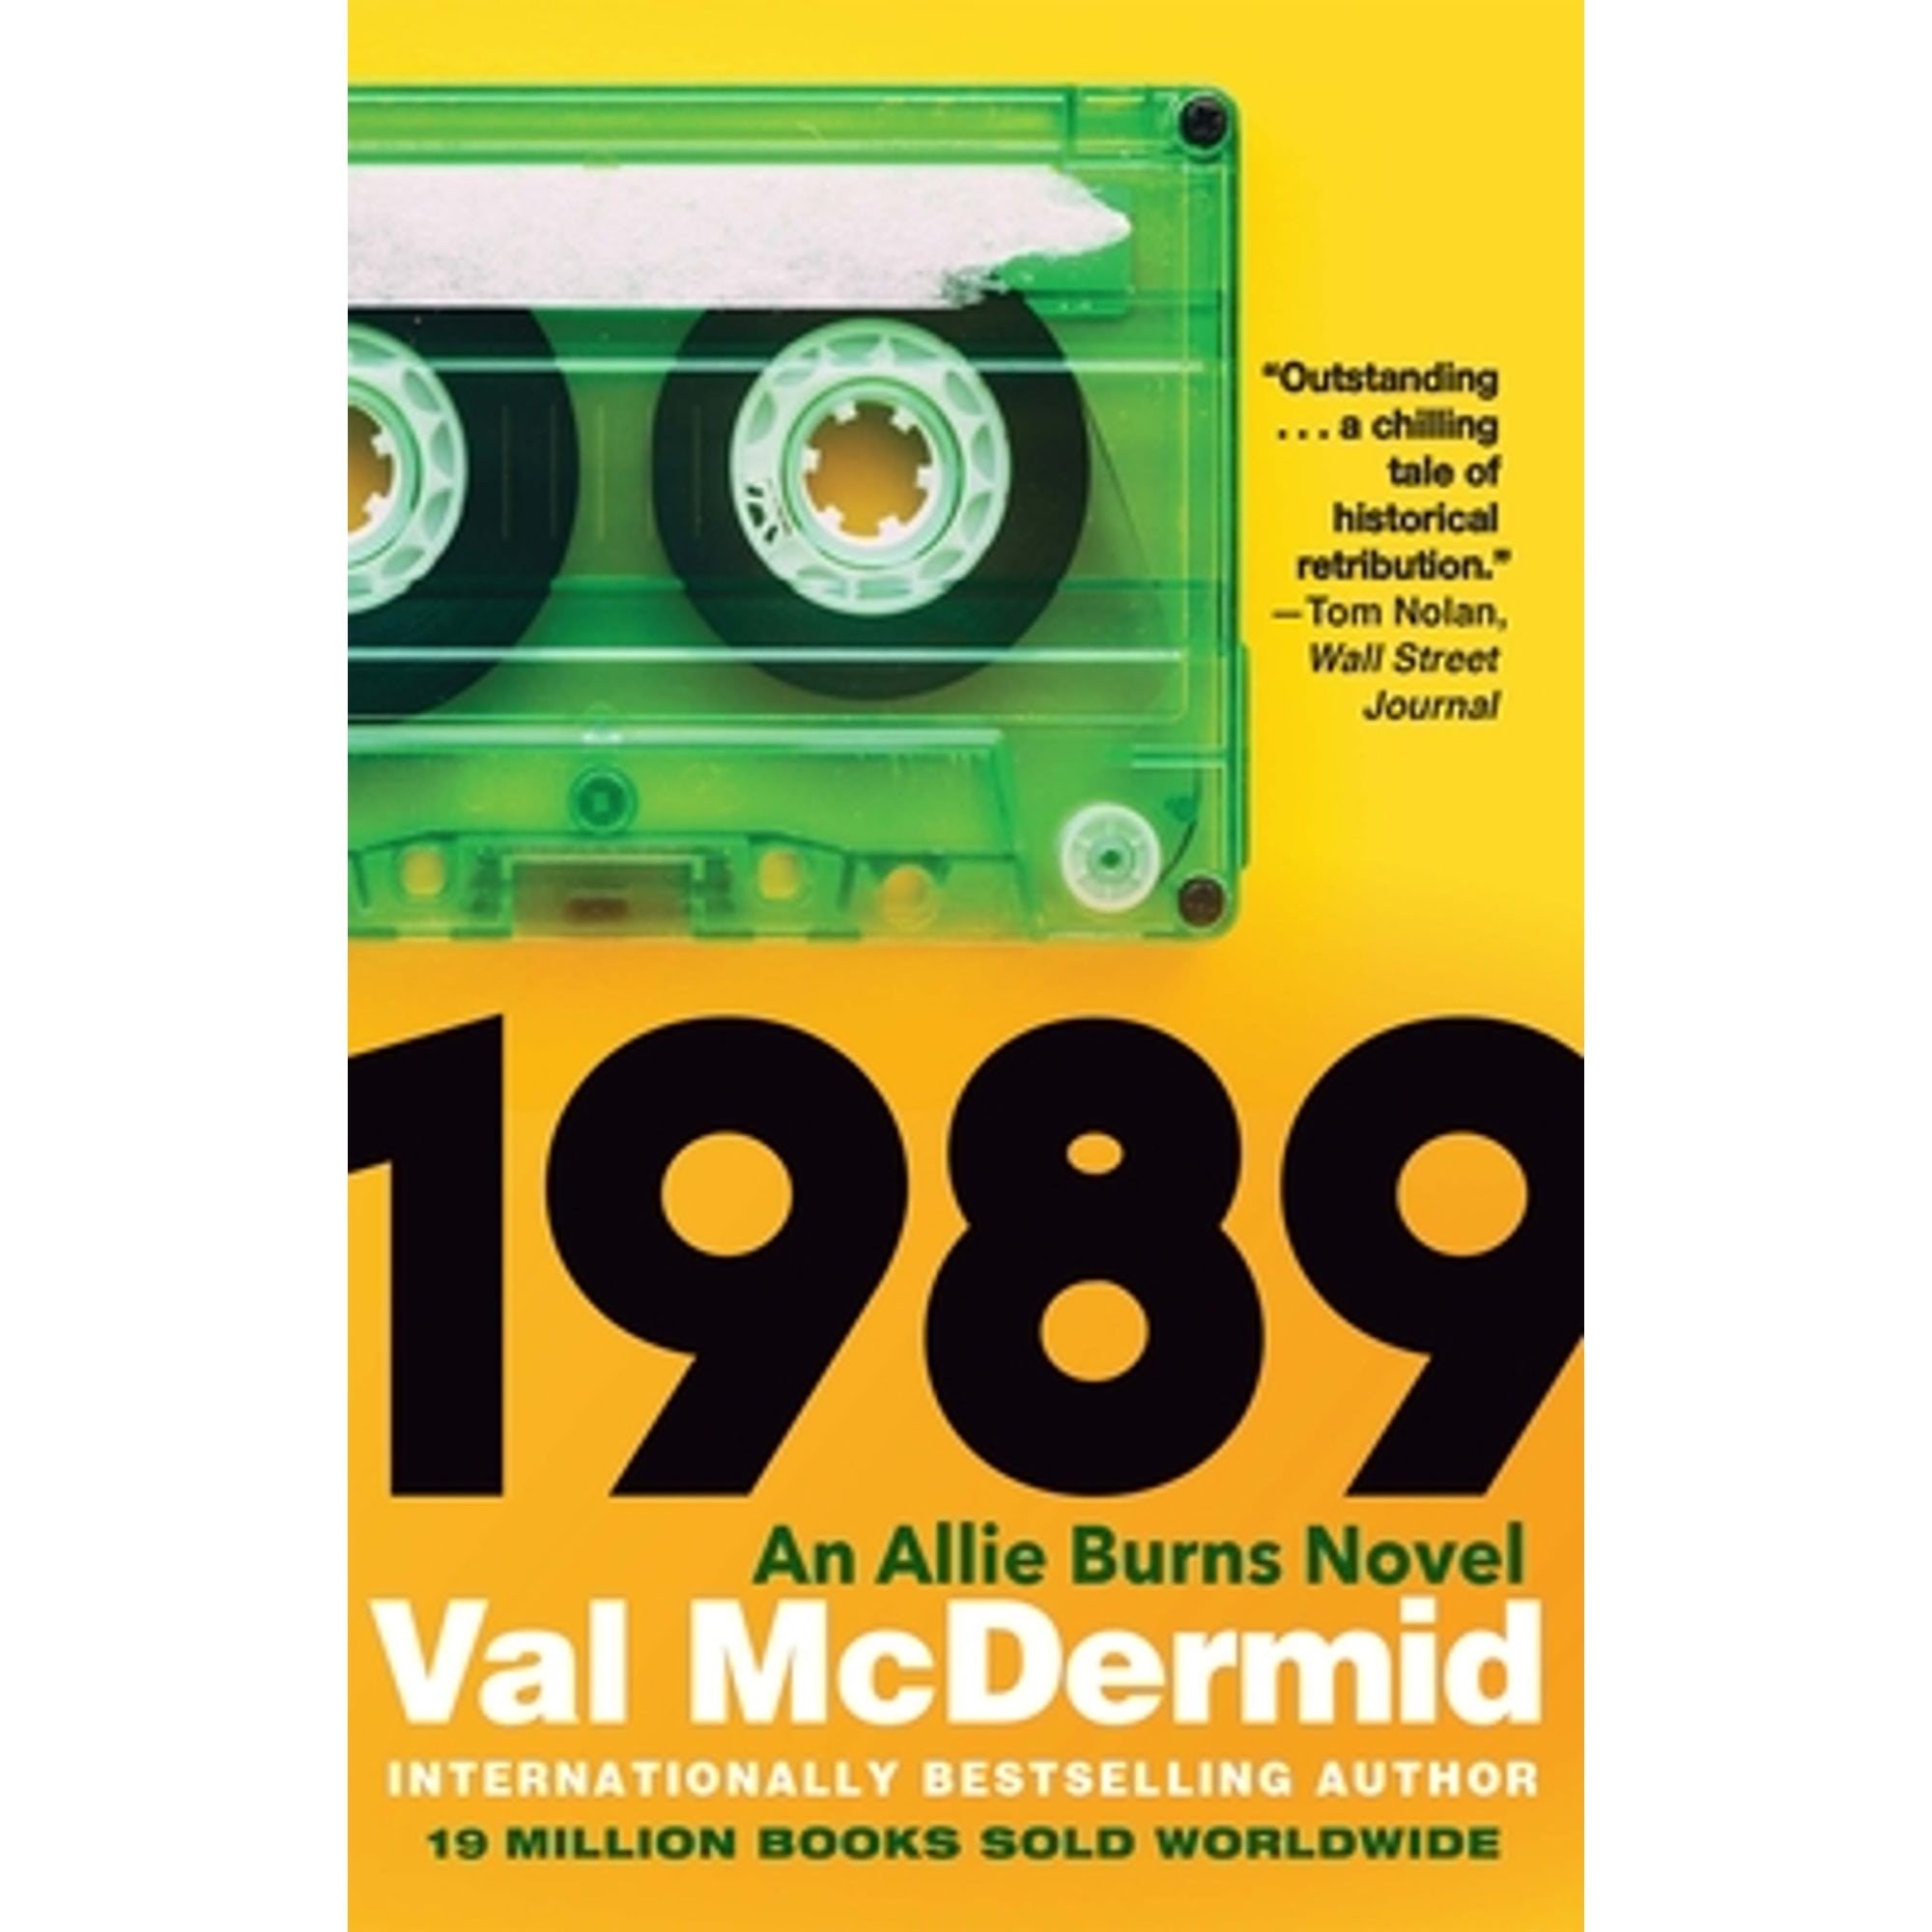 Pre-Owned 1989 (Paperback) by Val McDermid